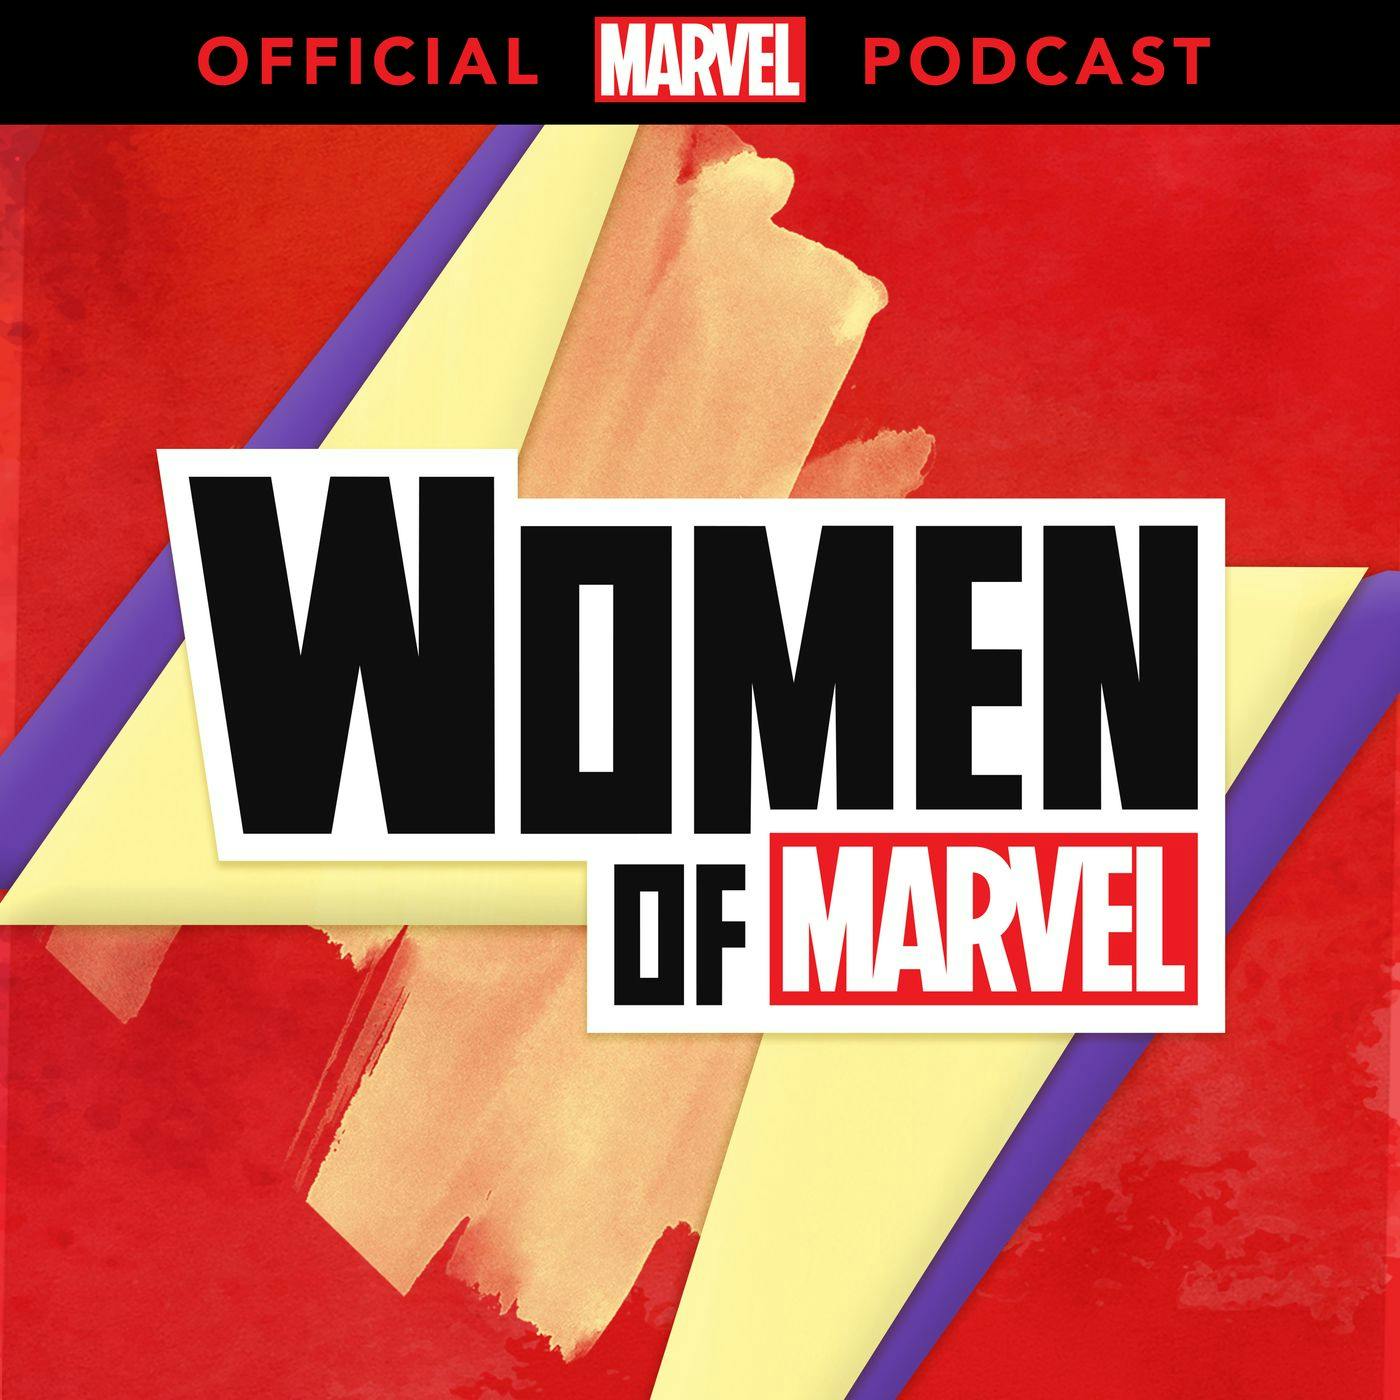 The Life of Captain Marvel with Margaret Stohl